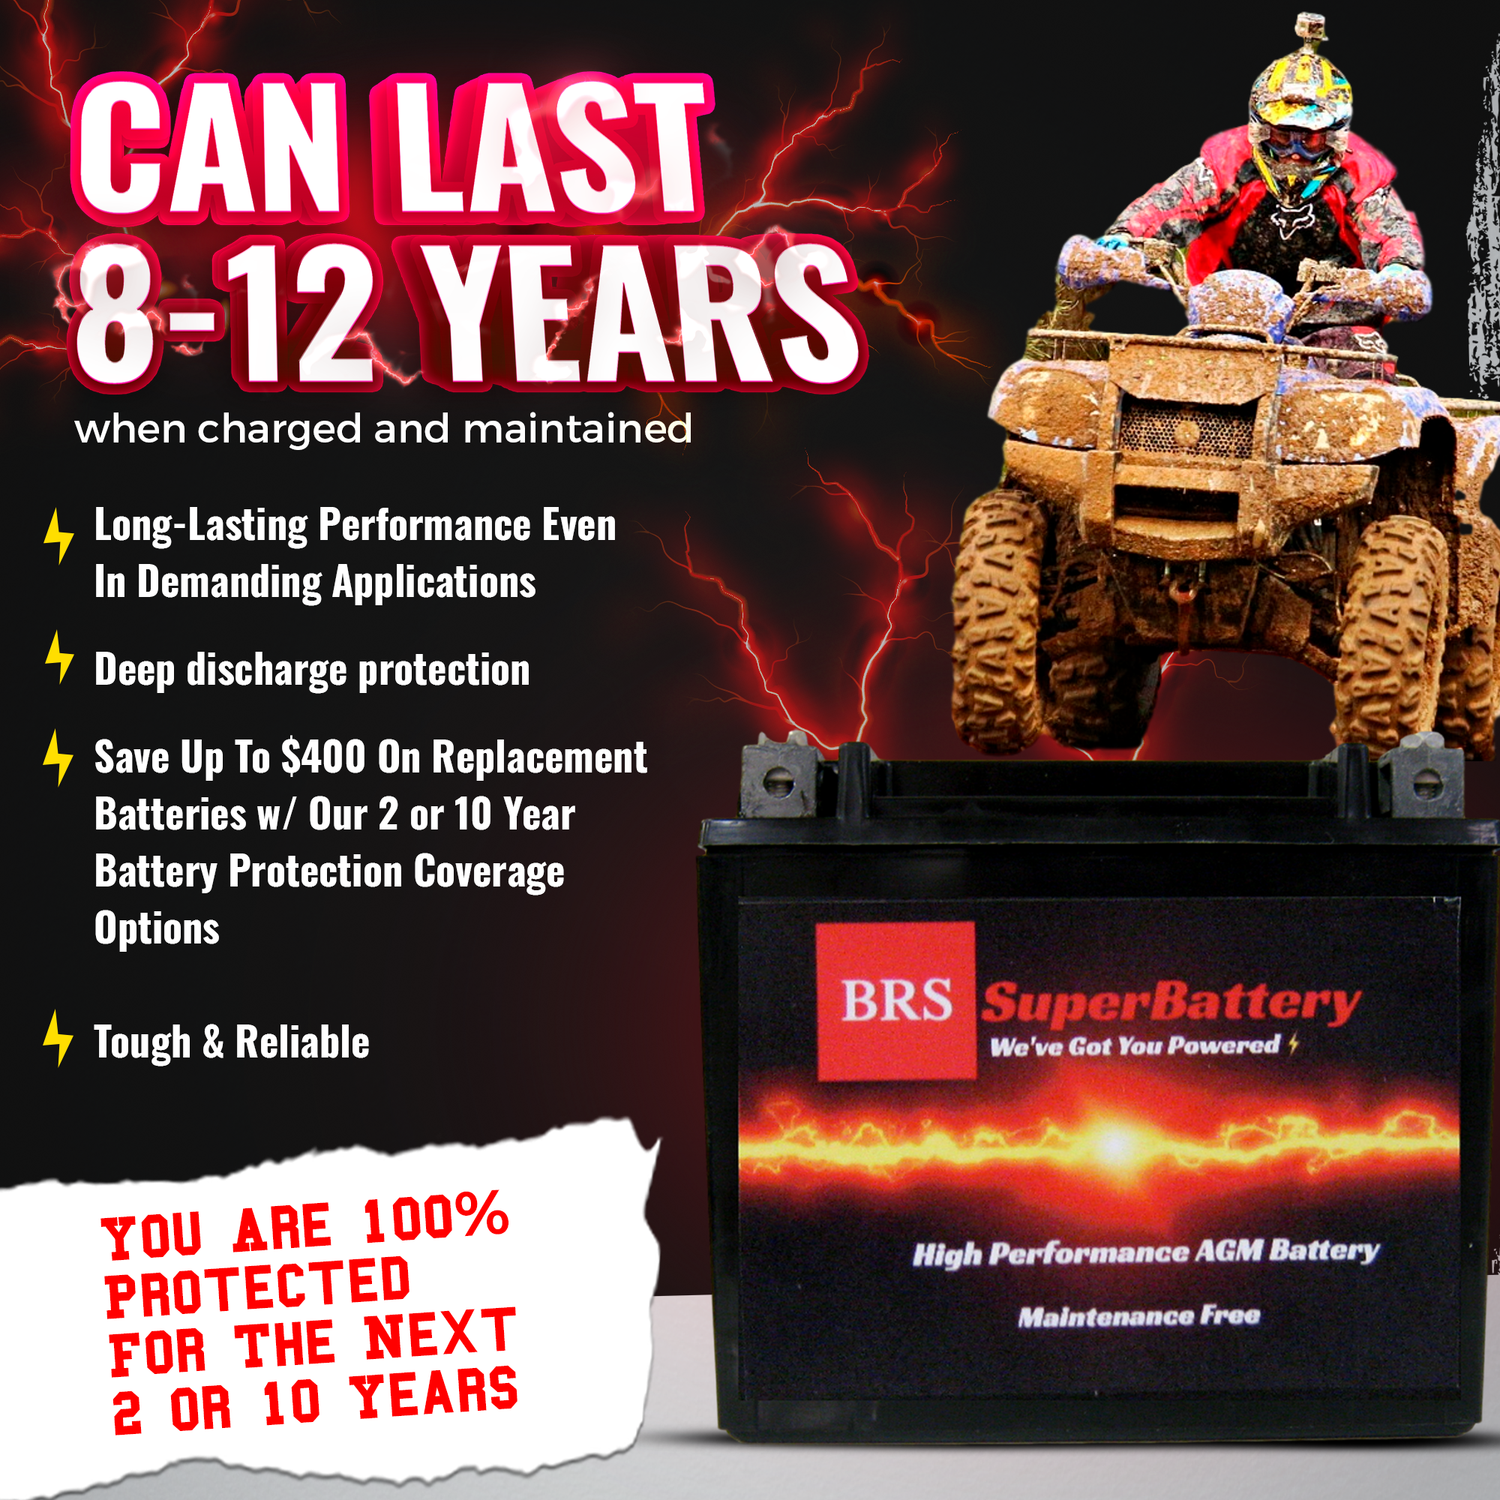 BRS9B-BS 12v High Performance Sealed AGM PowerSport 2 Year Battery - BRS Super Battery